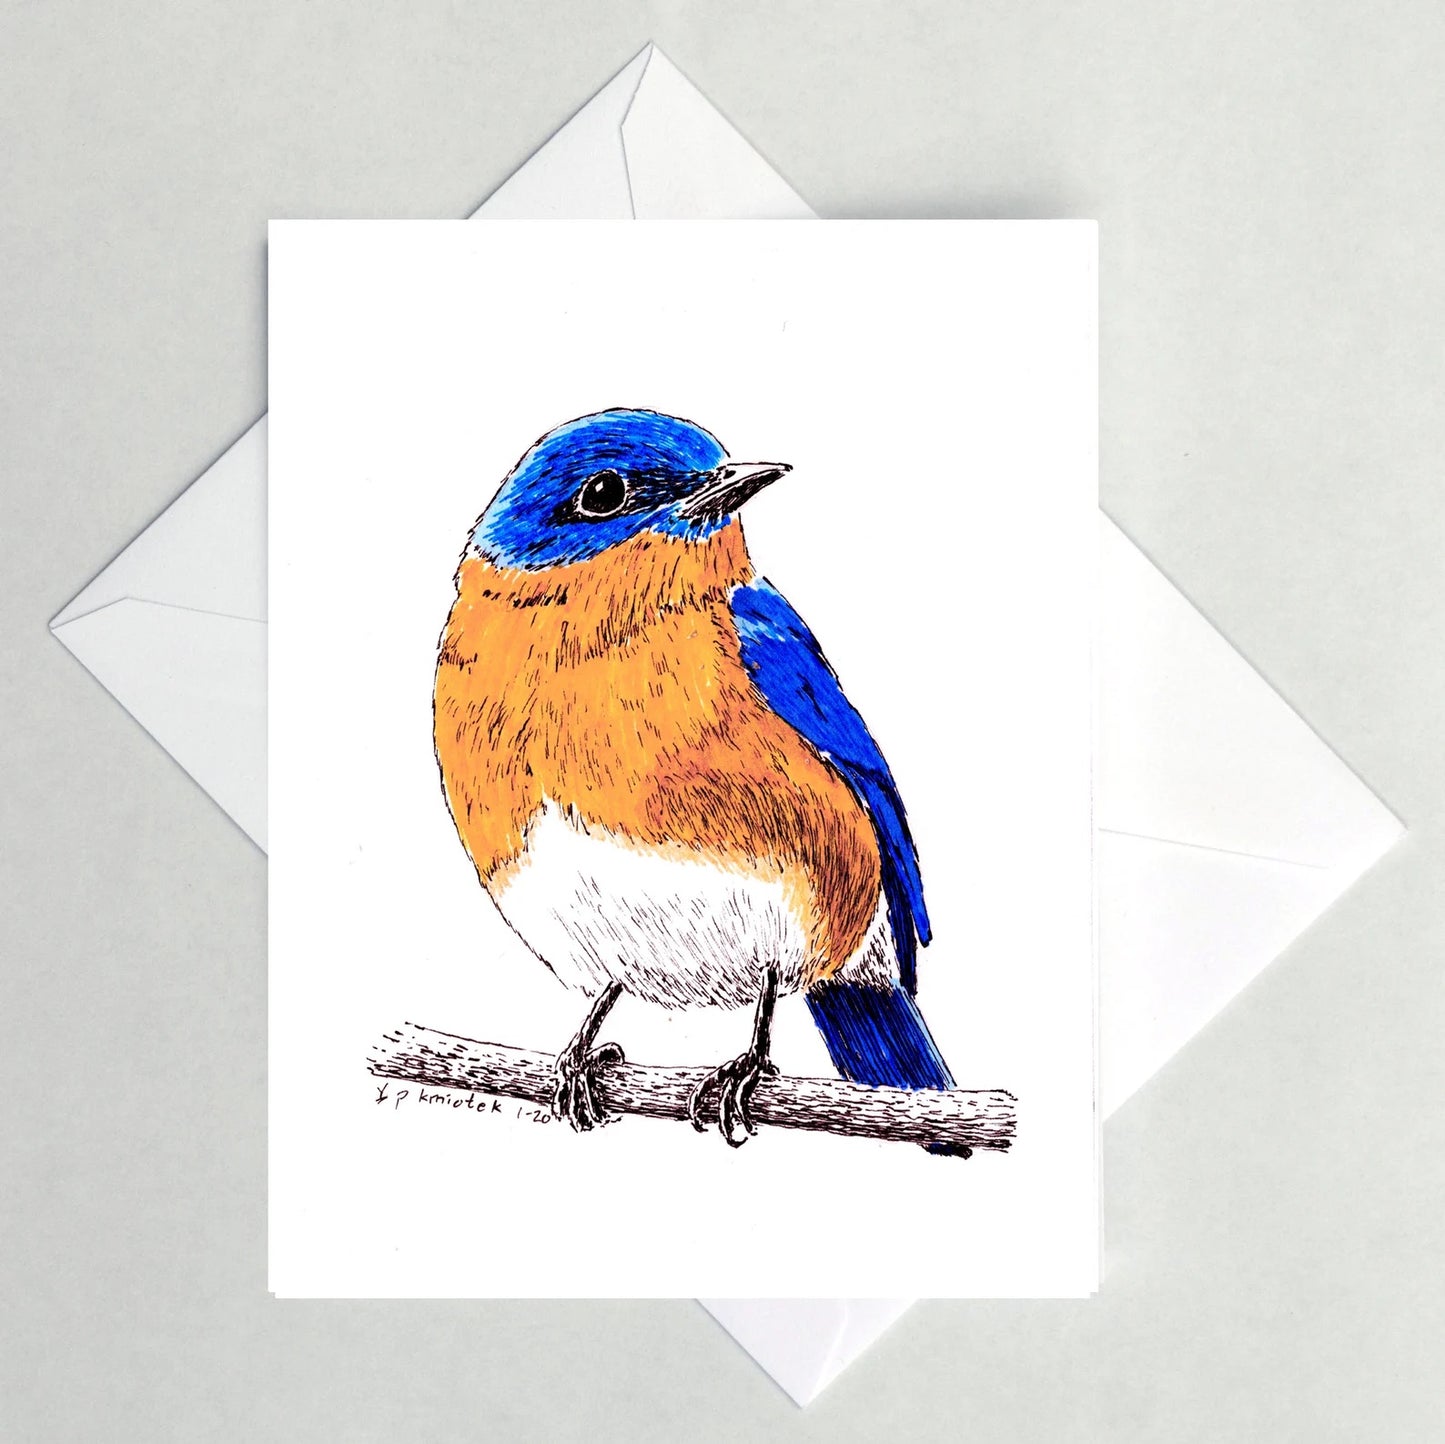 Blank folding card featuring an ink drawing of a Eastern Bluebird perched on a branch, by Paul Kmiotek. 4.75 x 5.75 Inches